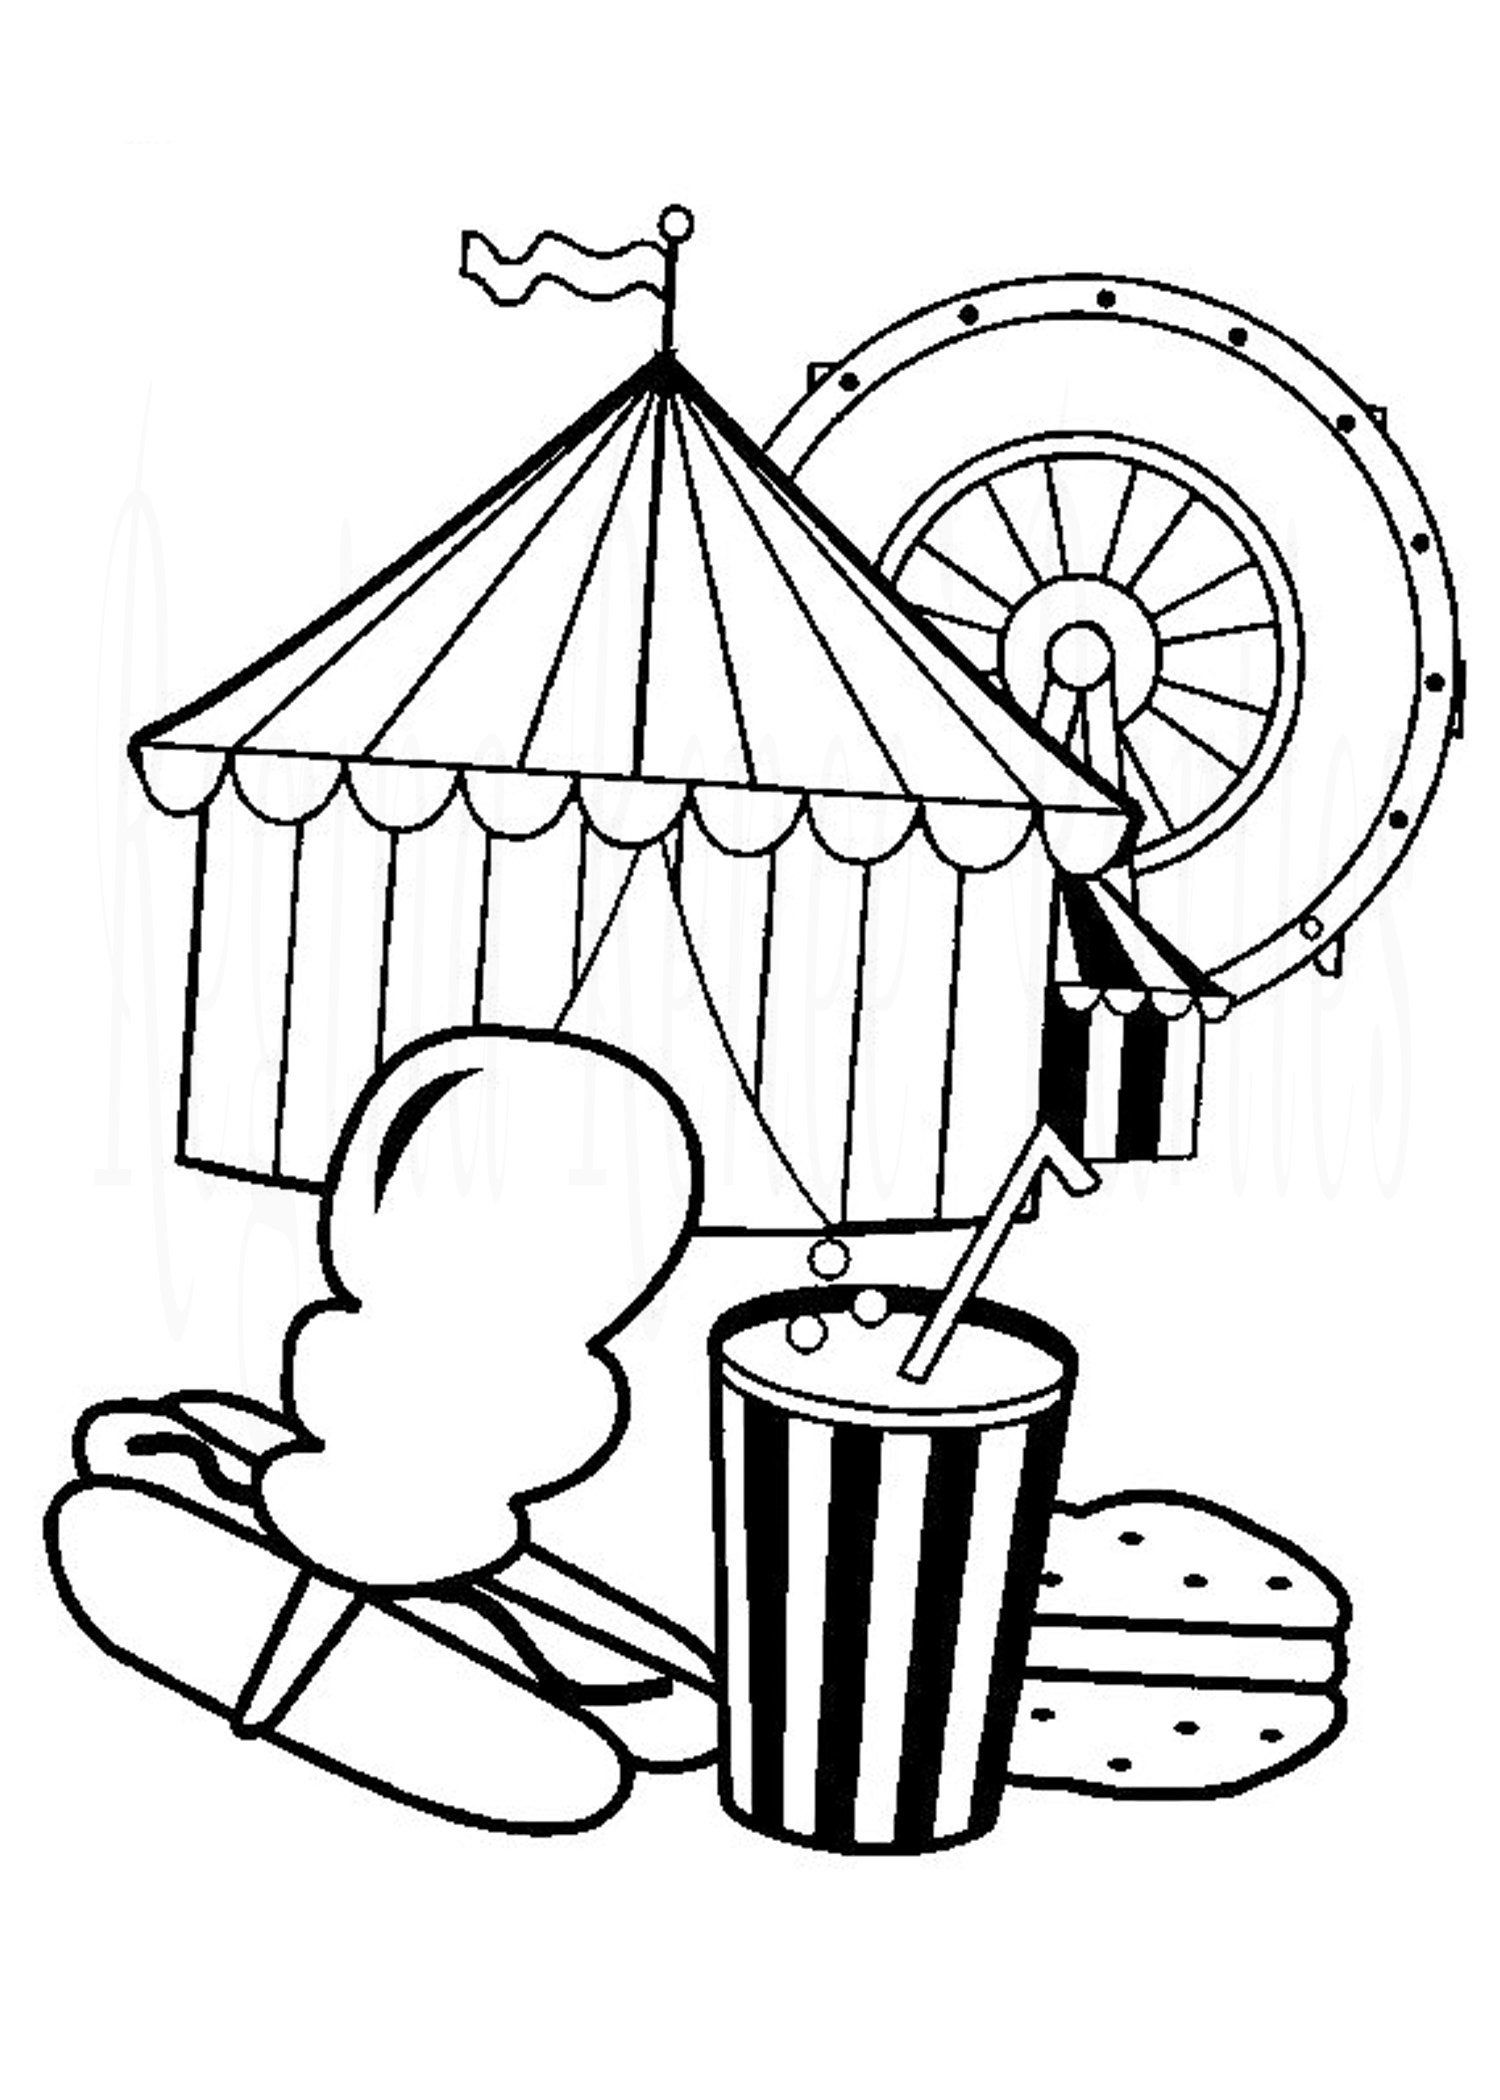 Coloring packs custom coloring pages carnival coloring sheets party favors coloring book digital printable